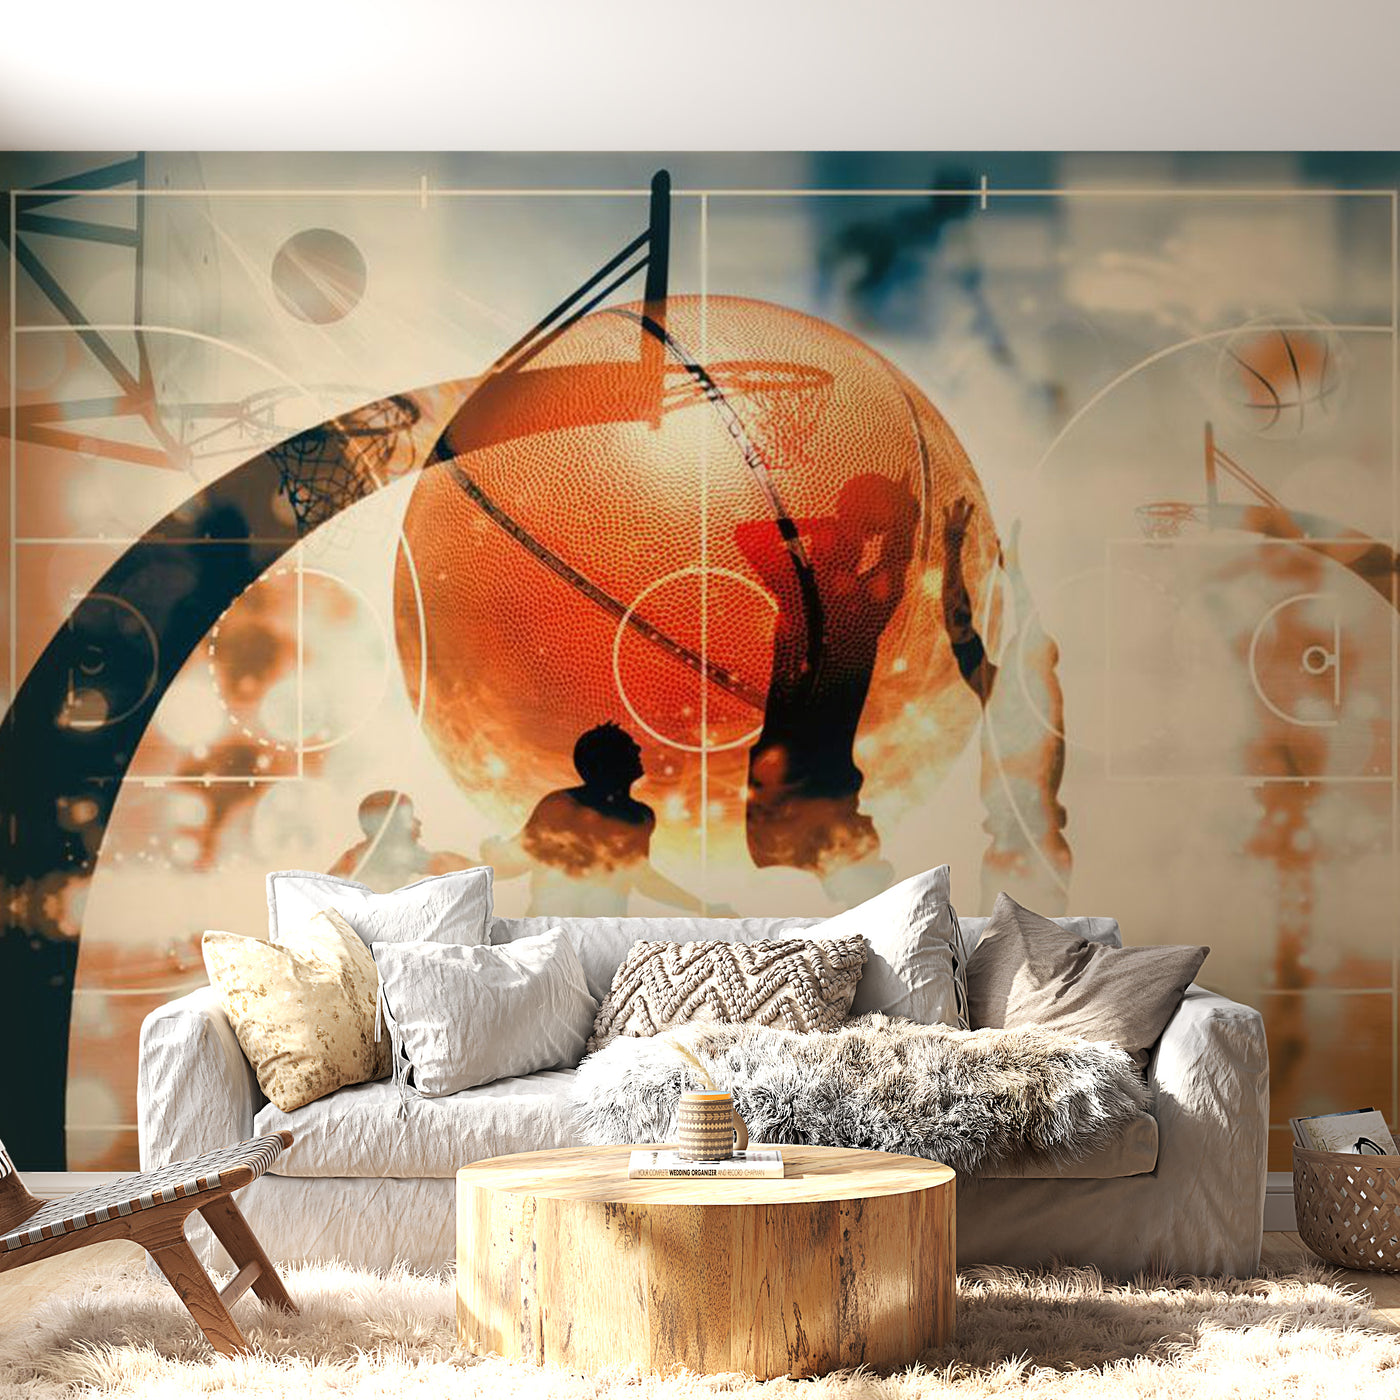 Peel & Stick Basketball Wall Mural - I Love Basketball - Removable Wall Decals